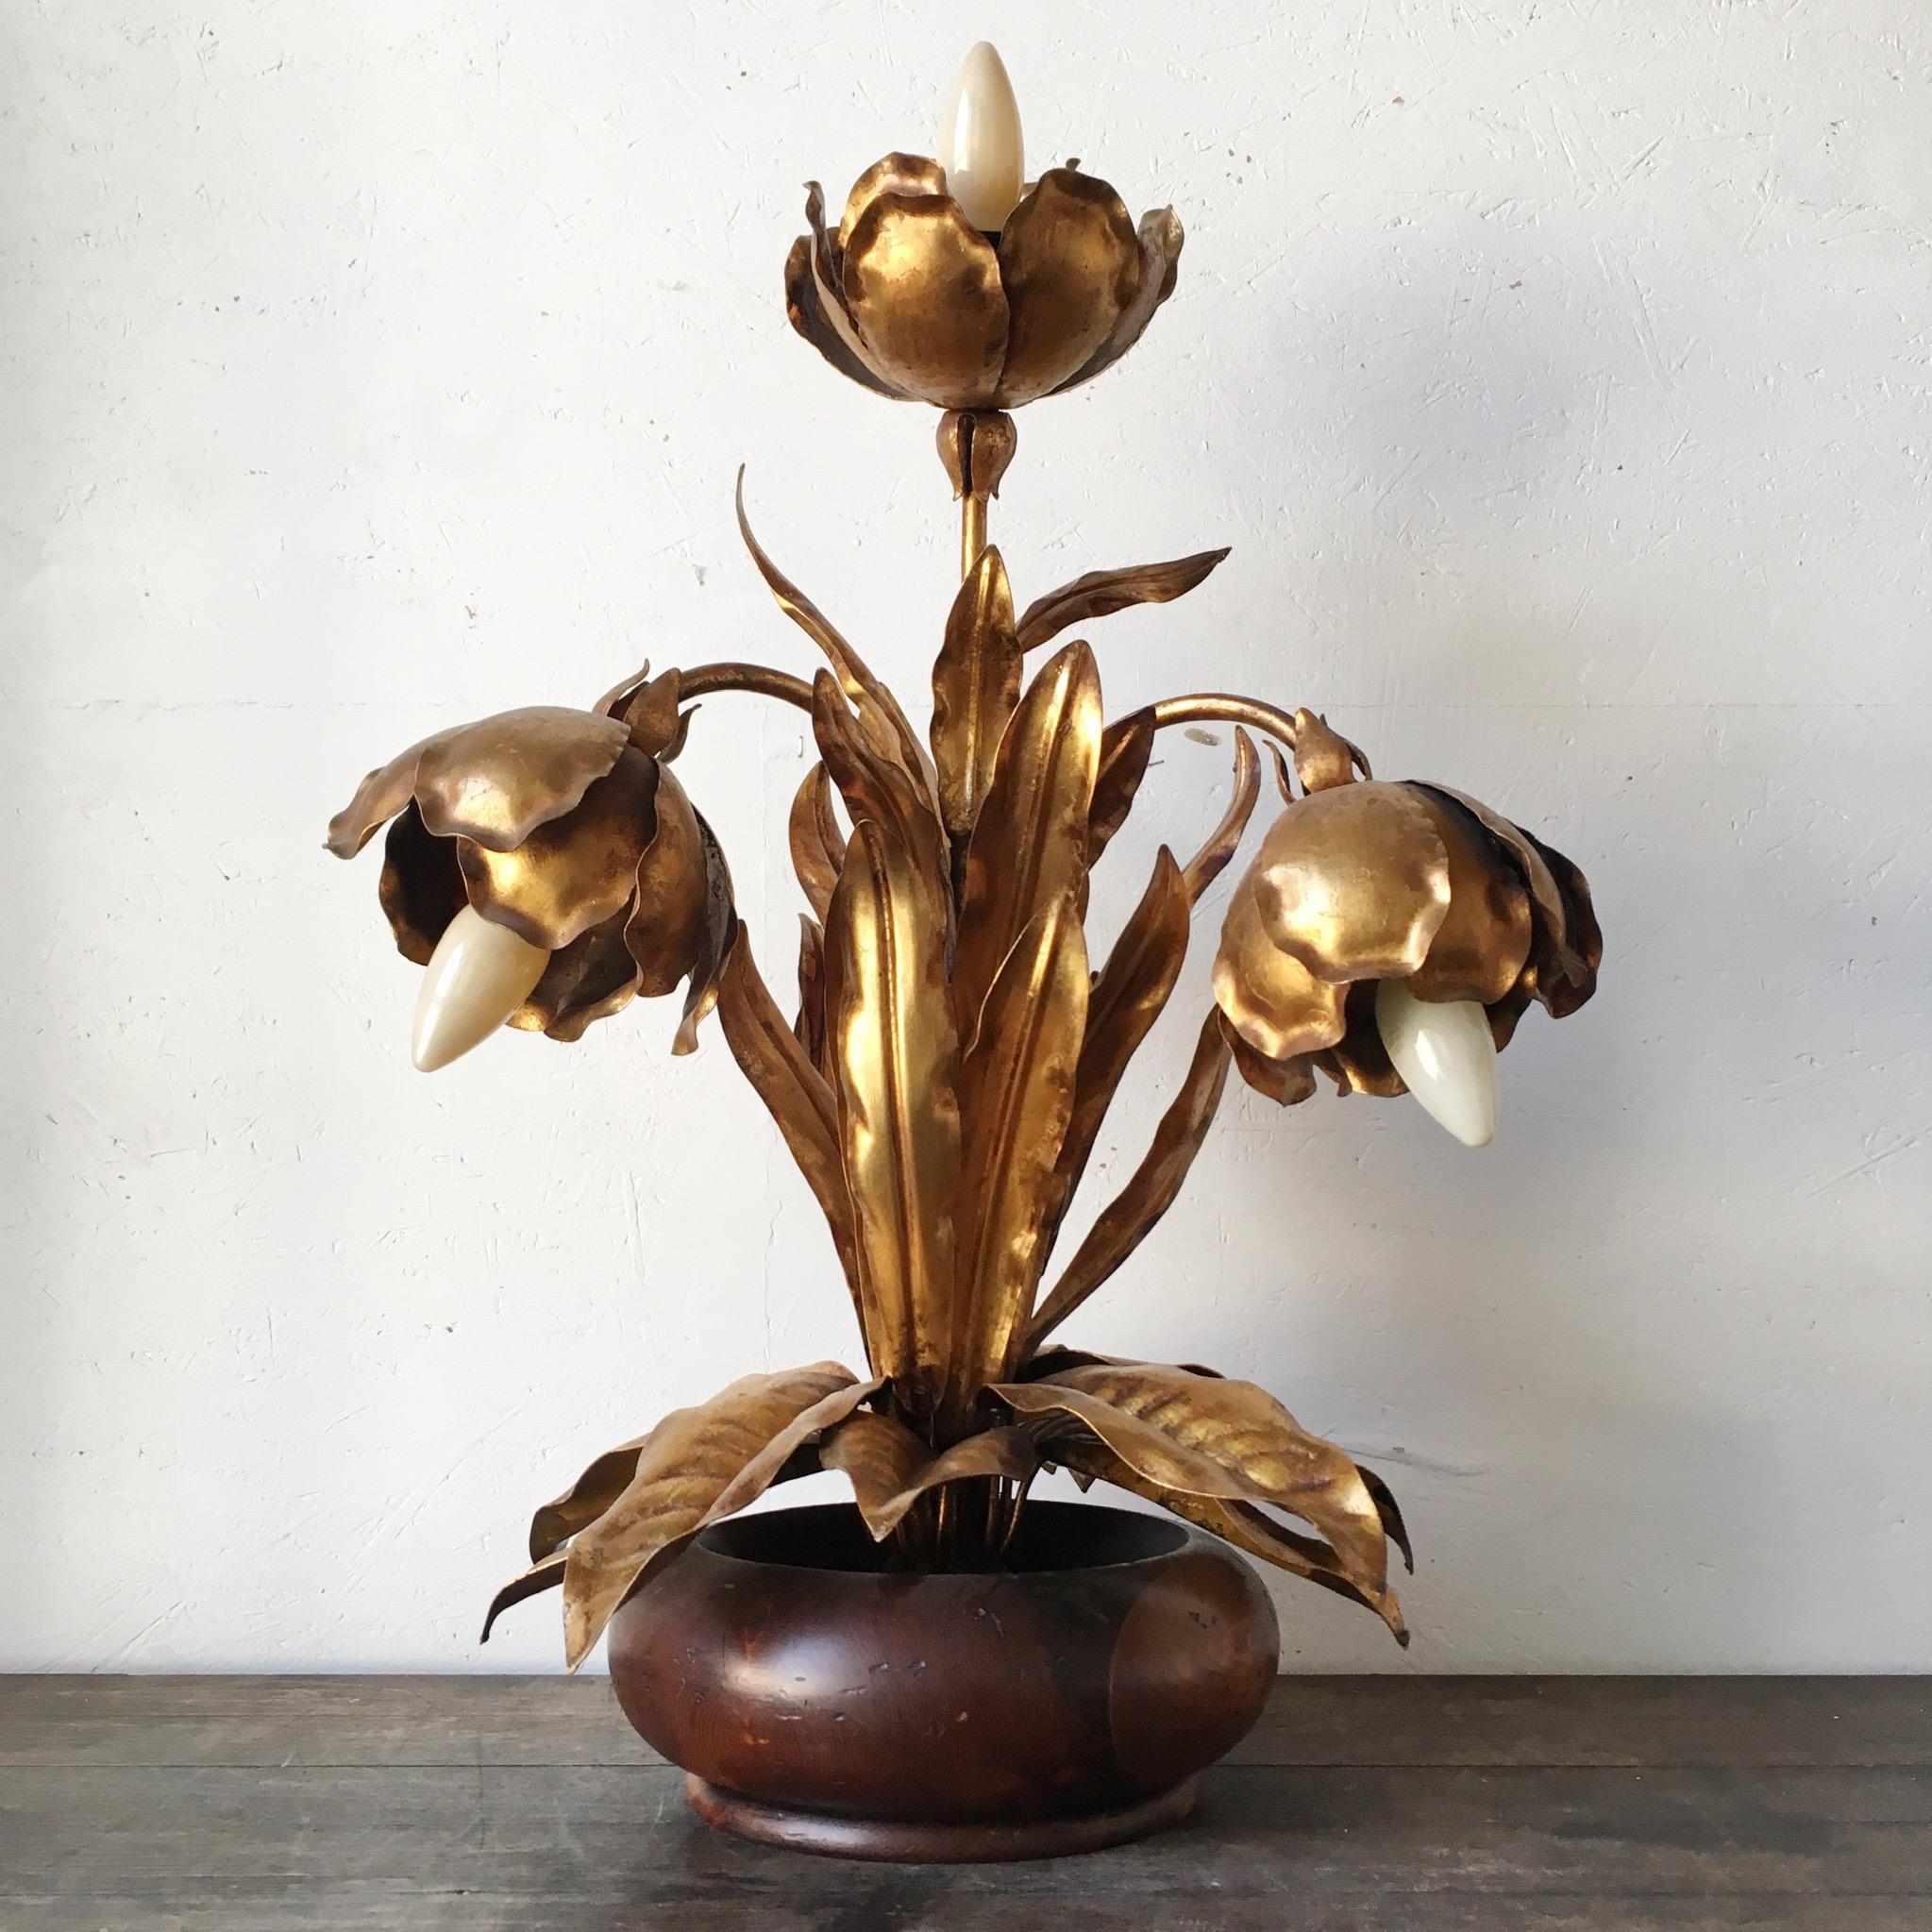 Stunning large Italian gilt metal tole lamp,
circa 1970s
The lamp has three large blooms cradling a single bulb each, the stems are surrounded by naturalistic textured leaves forming a full plant.
The dimensions are 65 cm height, 46 cm width, 37